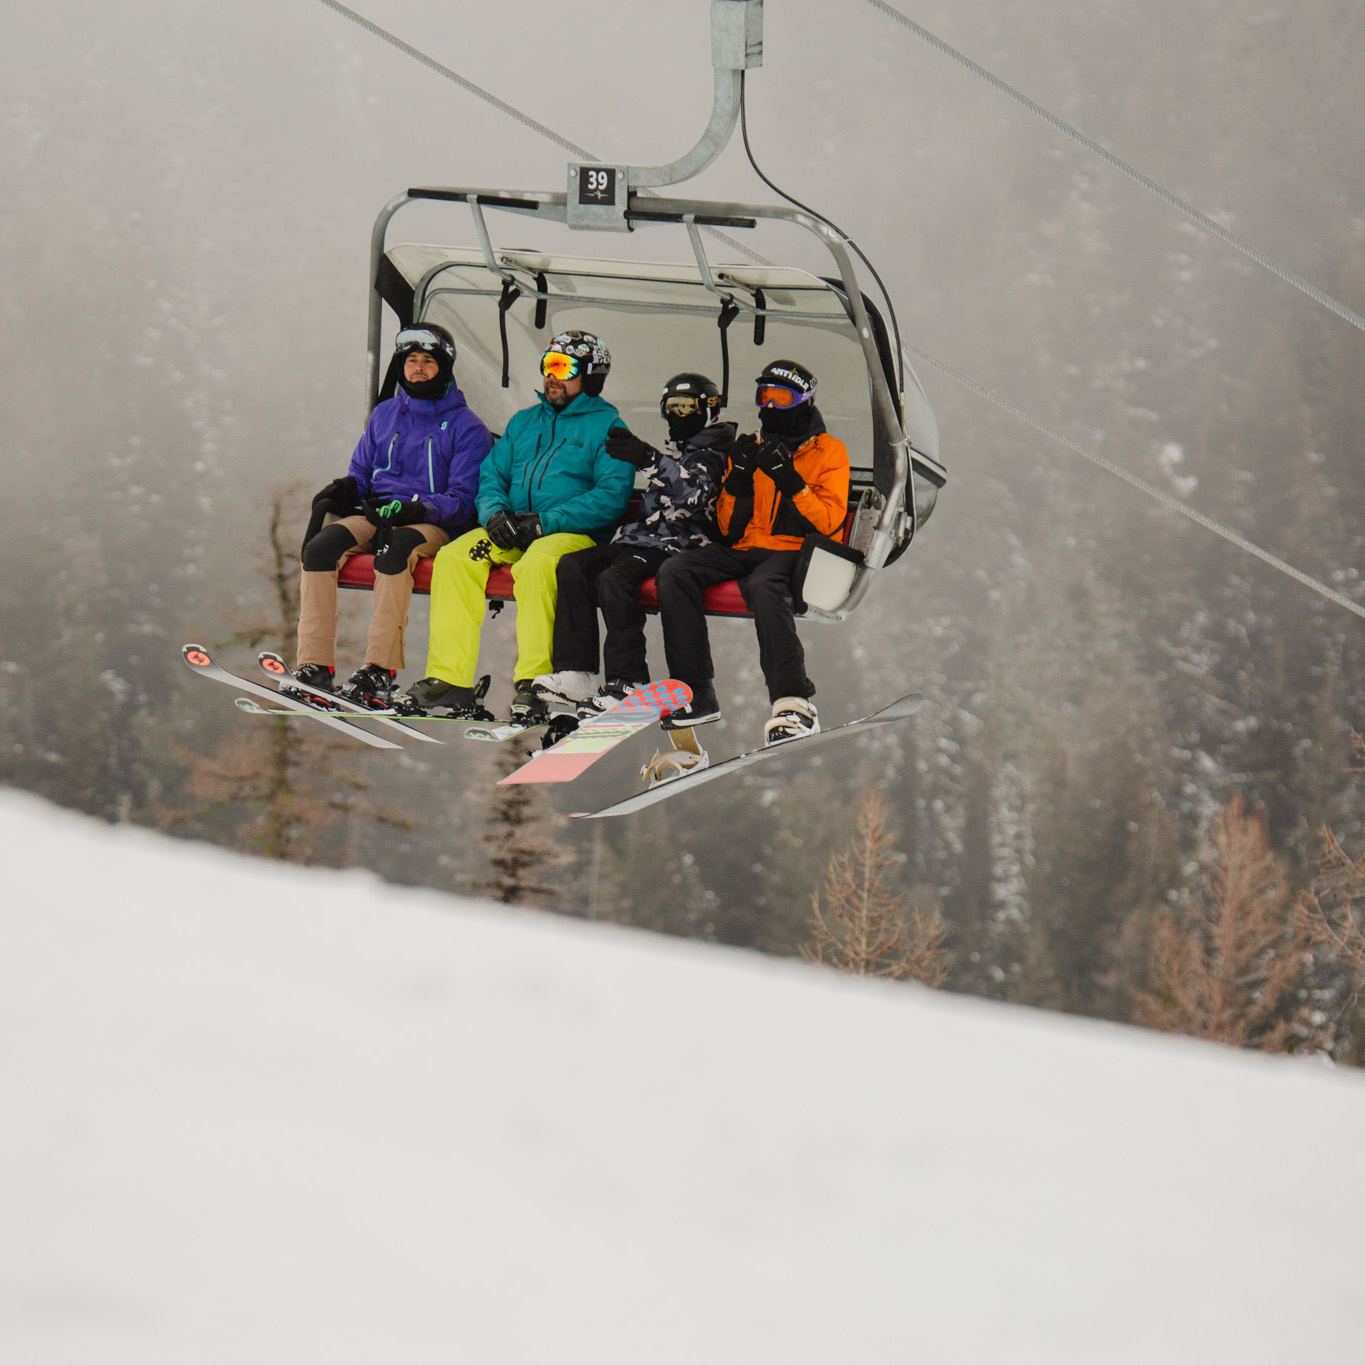 Chairlift ride on chair 2.